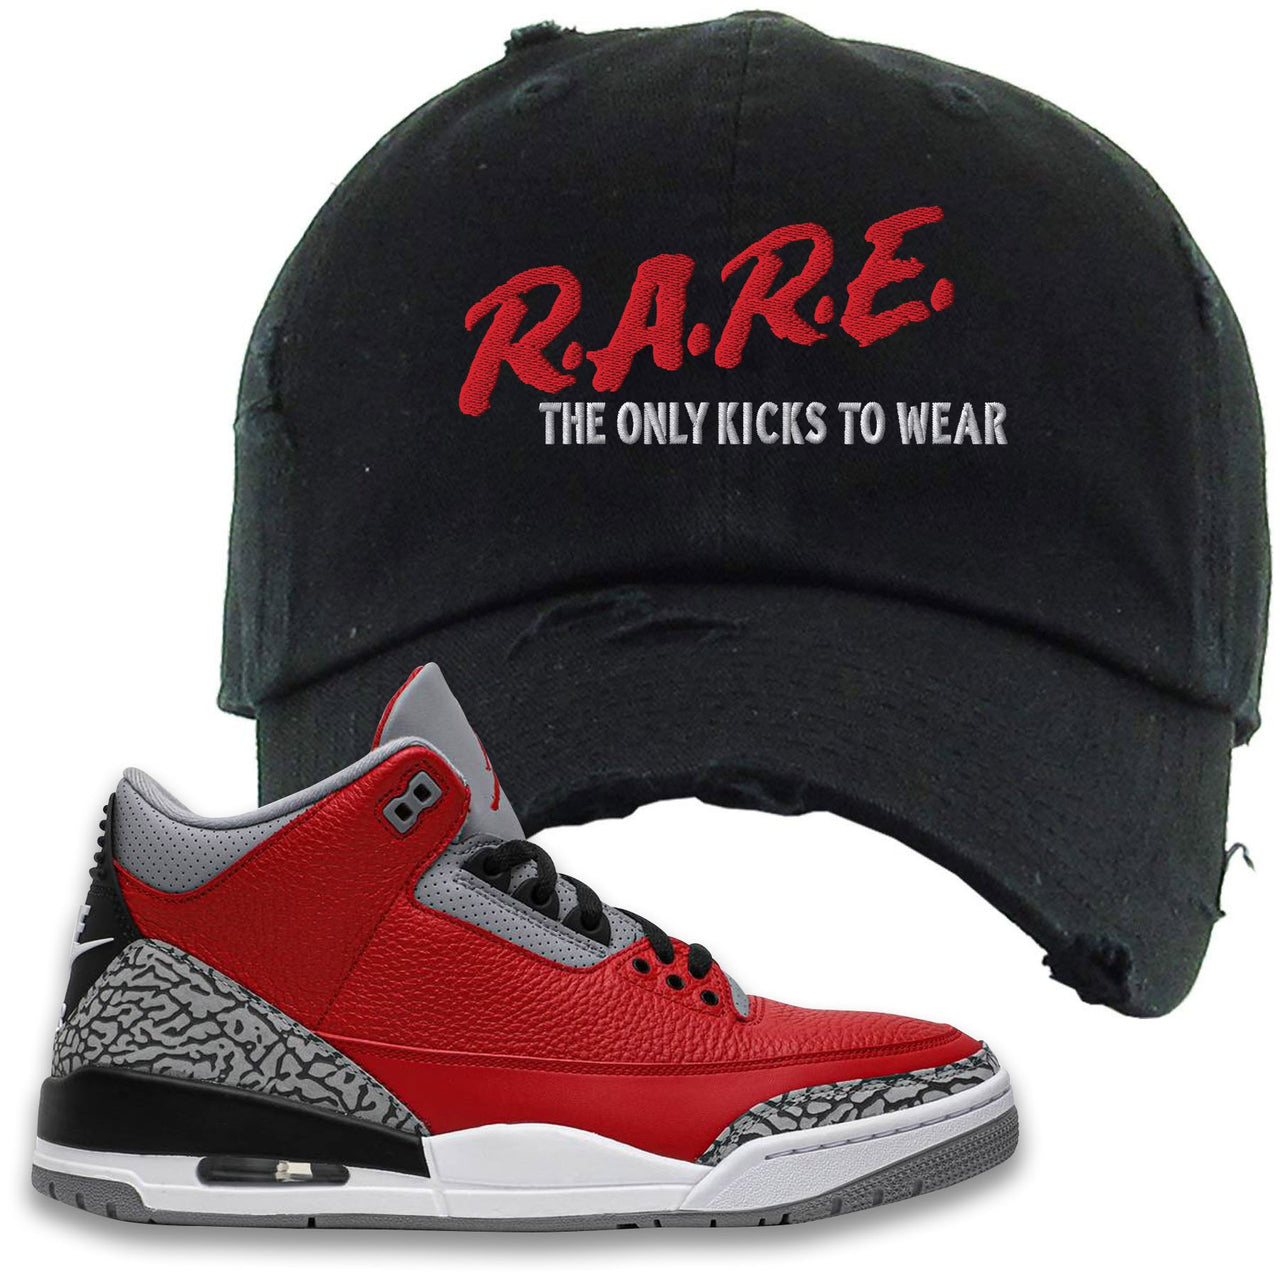 Chicago Exclusive Jordan 3 Red Cement Sneaker Black Distressed Dad Hat | Hat to match Jordan 3 All Star Red Cement Shoes | Rare